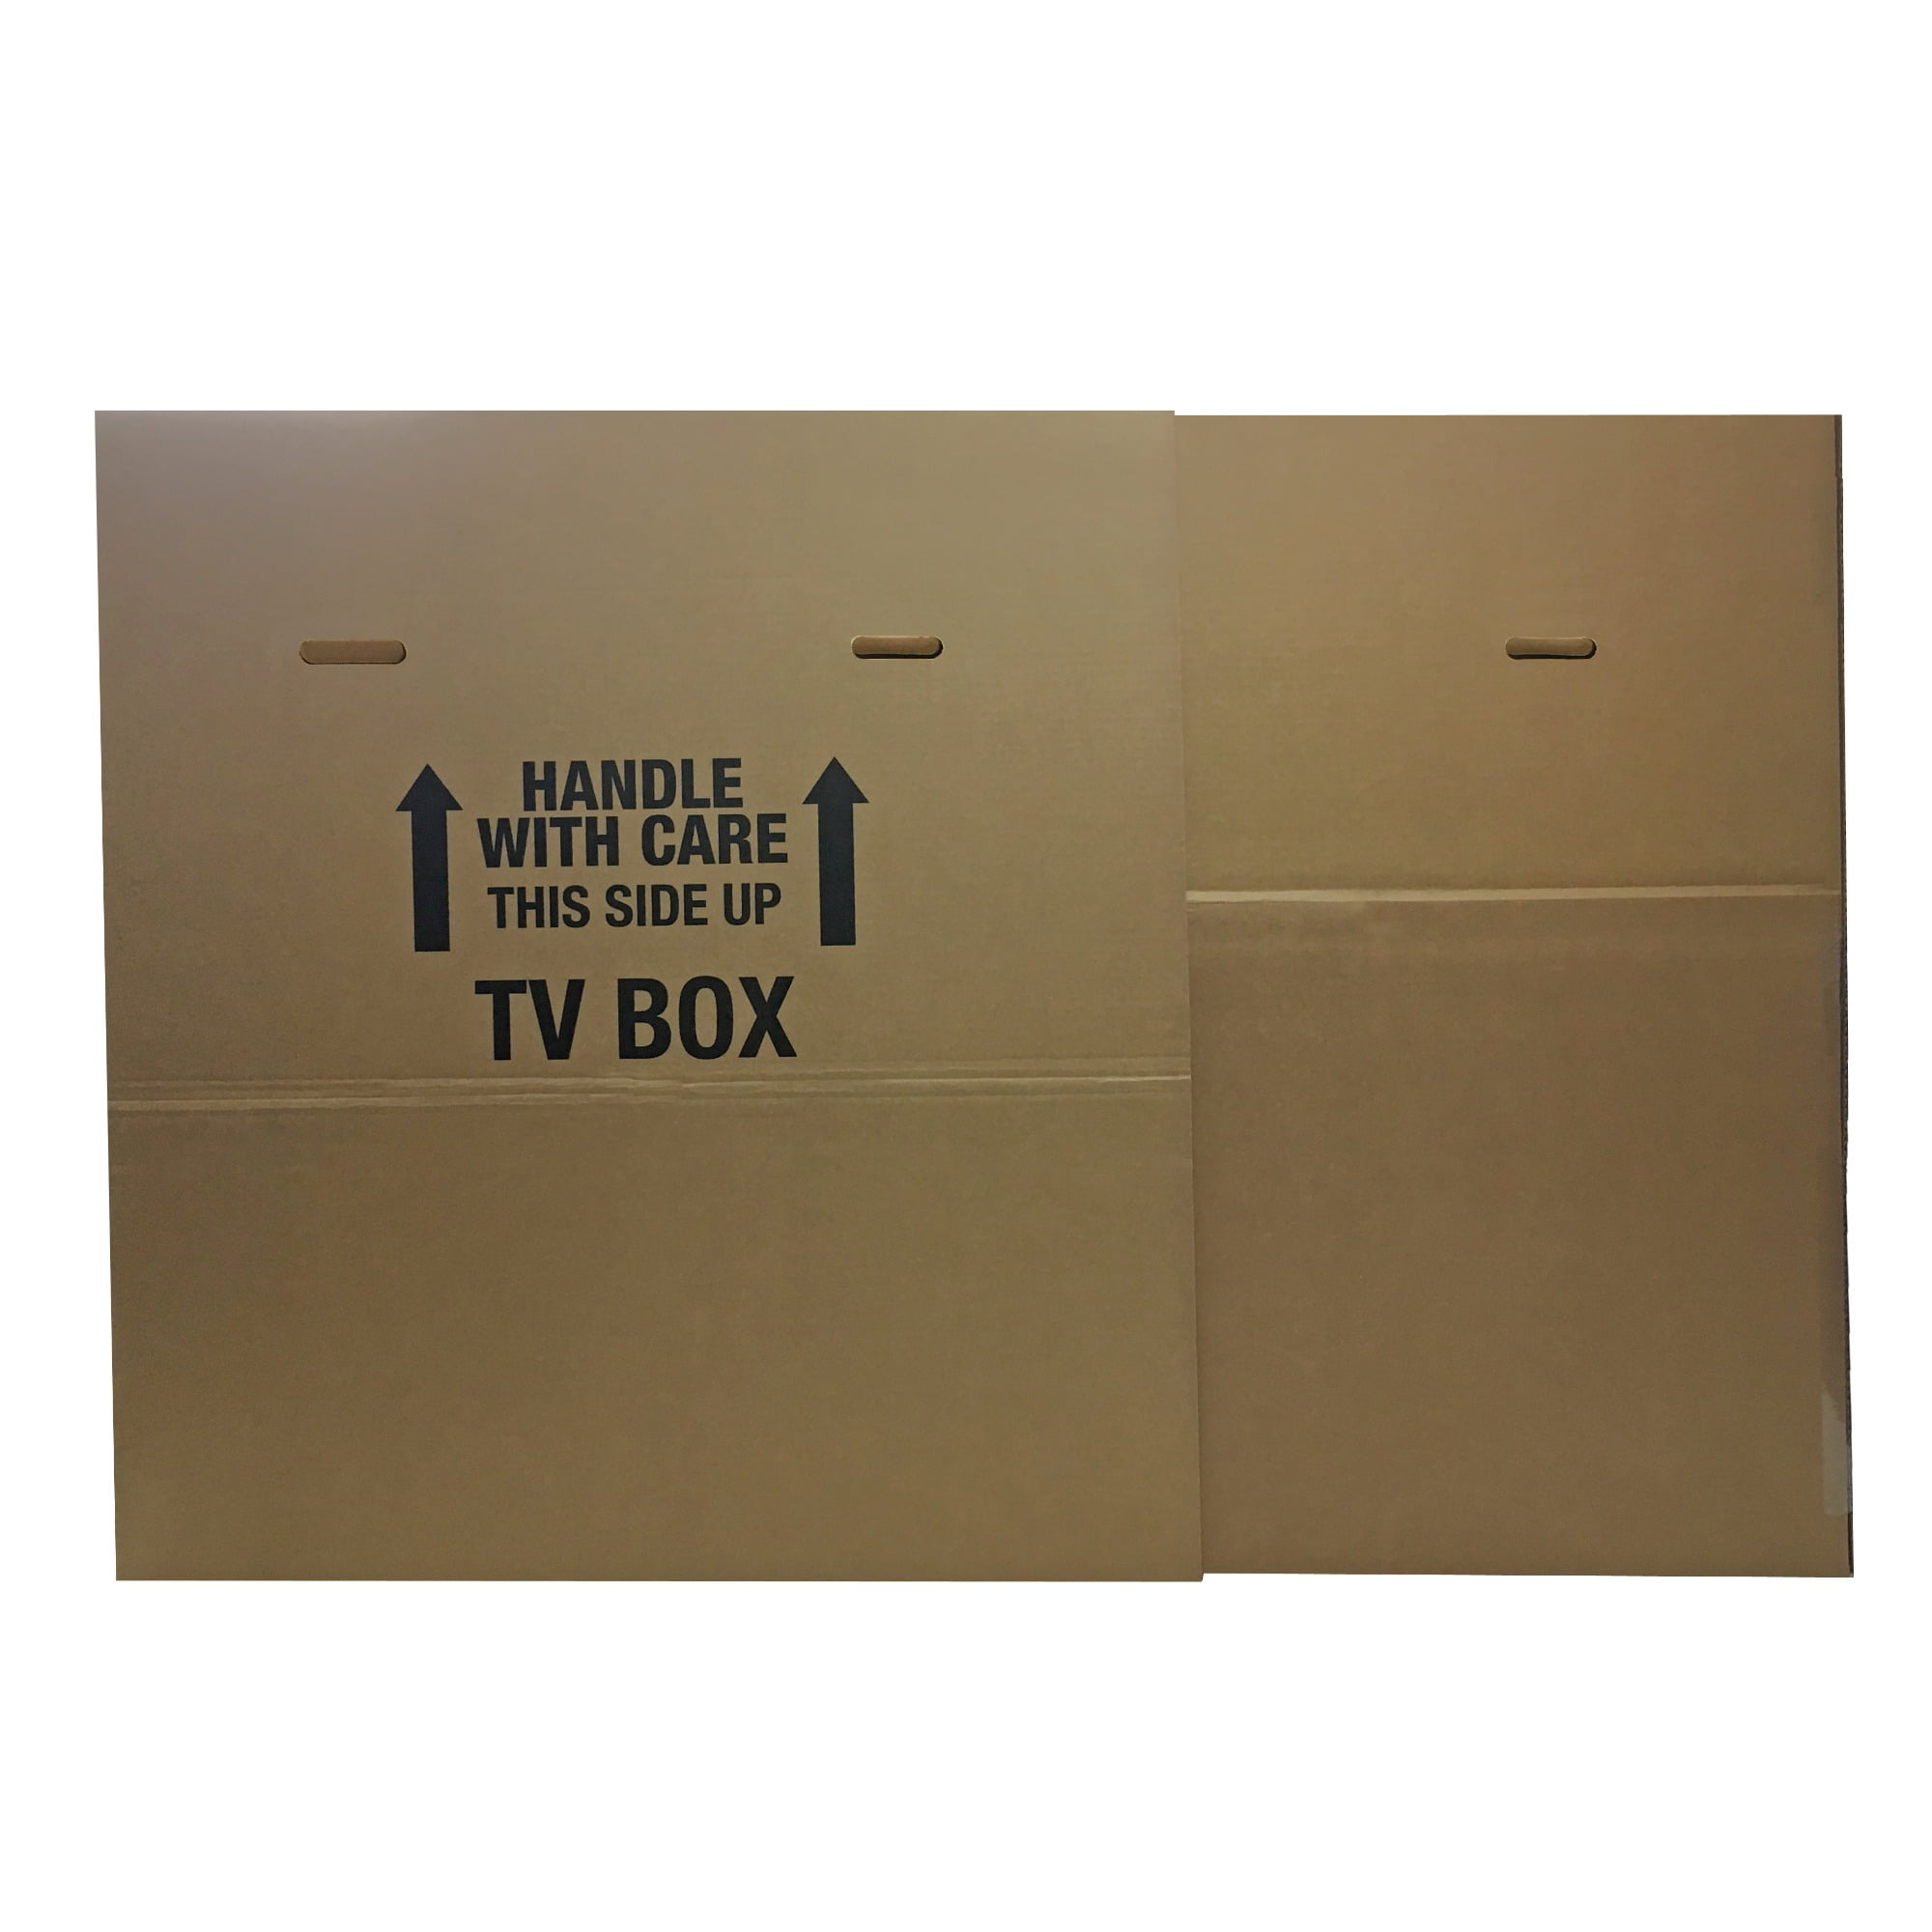 uBoxes Double Wall TV Moving Boxes 72 x 6 x 42 In Boxes w/ Sleeves, 2 Pack  